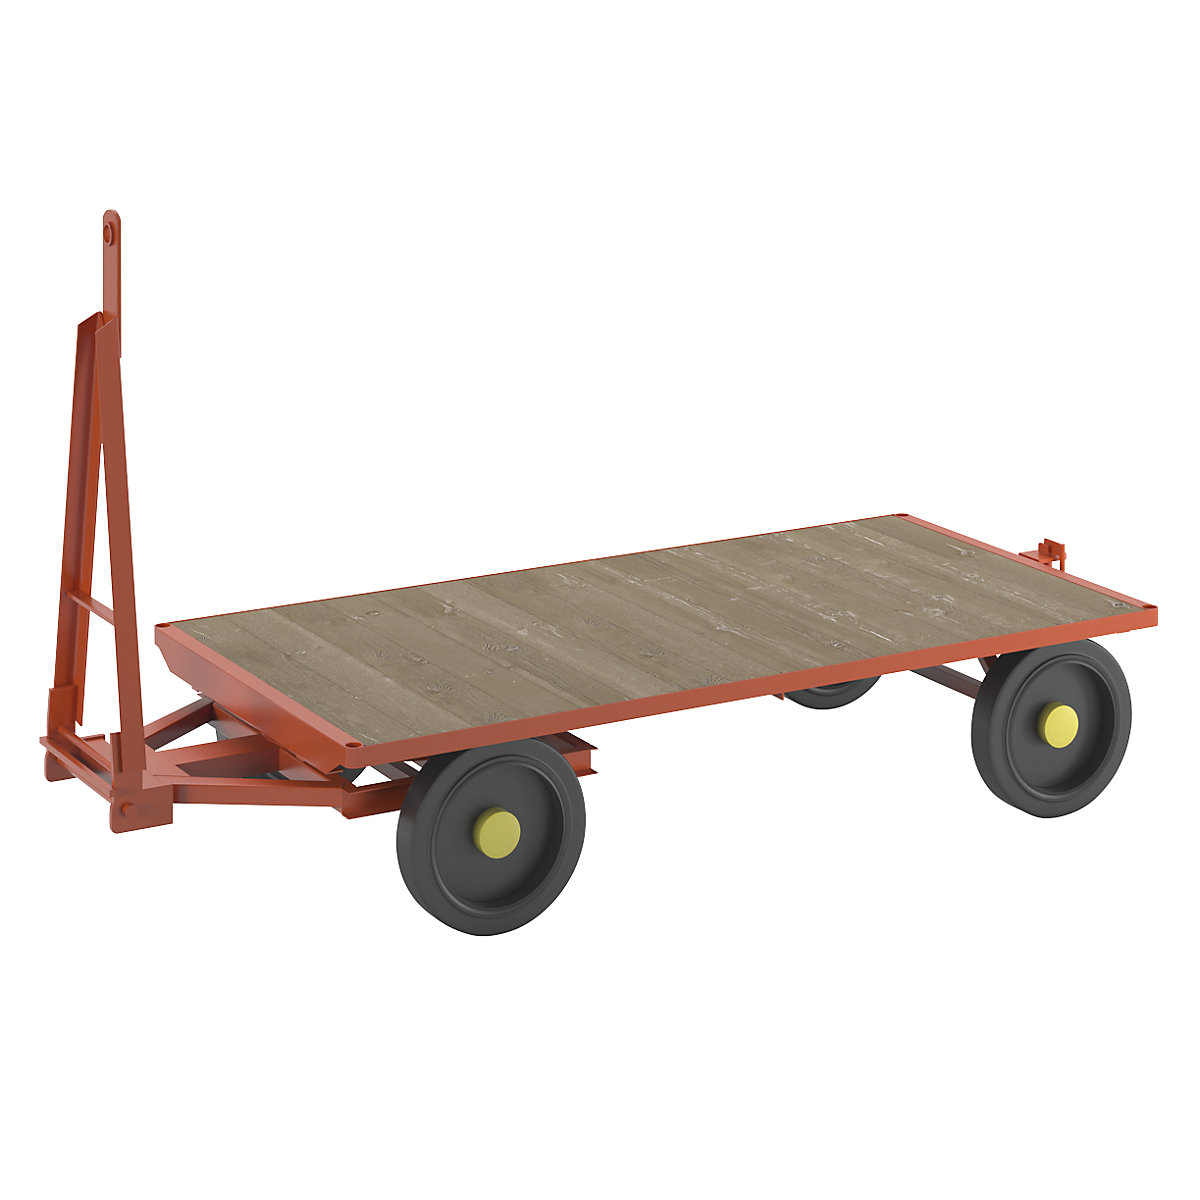 Trailer, 2-wheel turntable steering, max. load 2 t, platform 2.0 x 1.0 m, solid rubber tyres-2